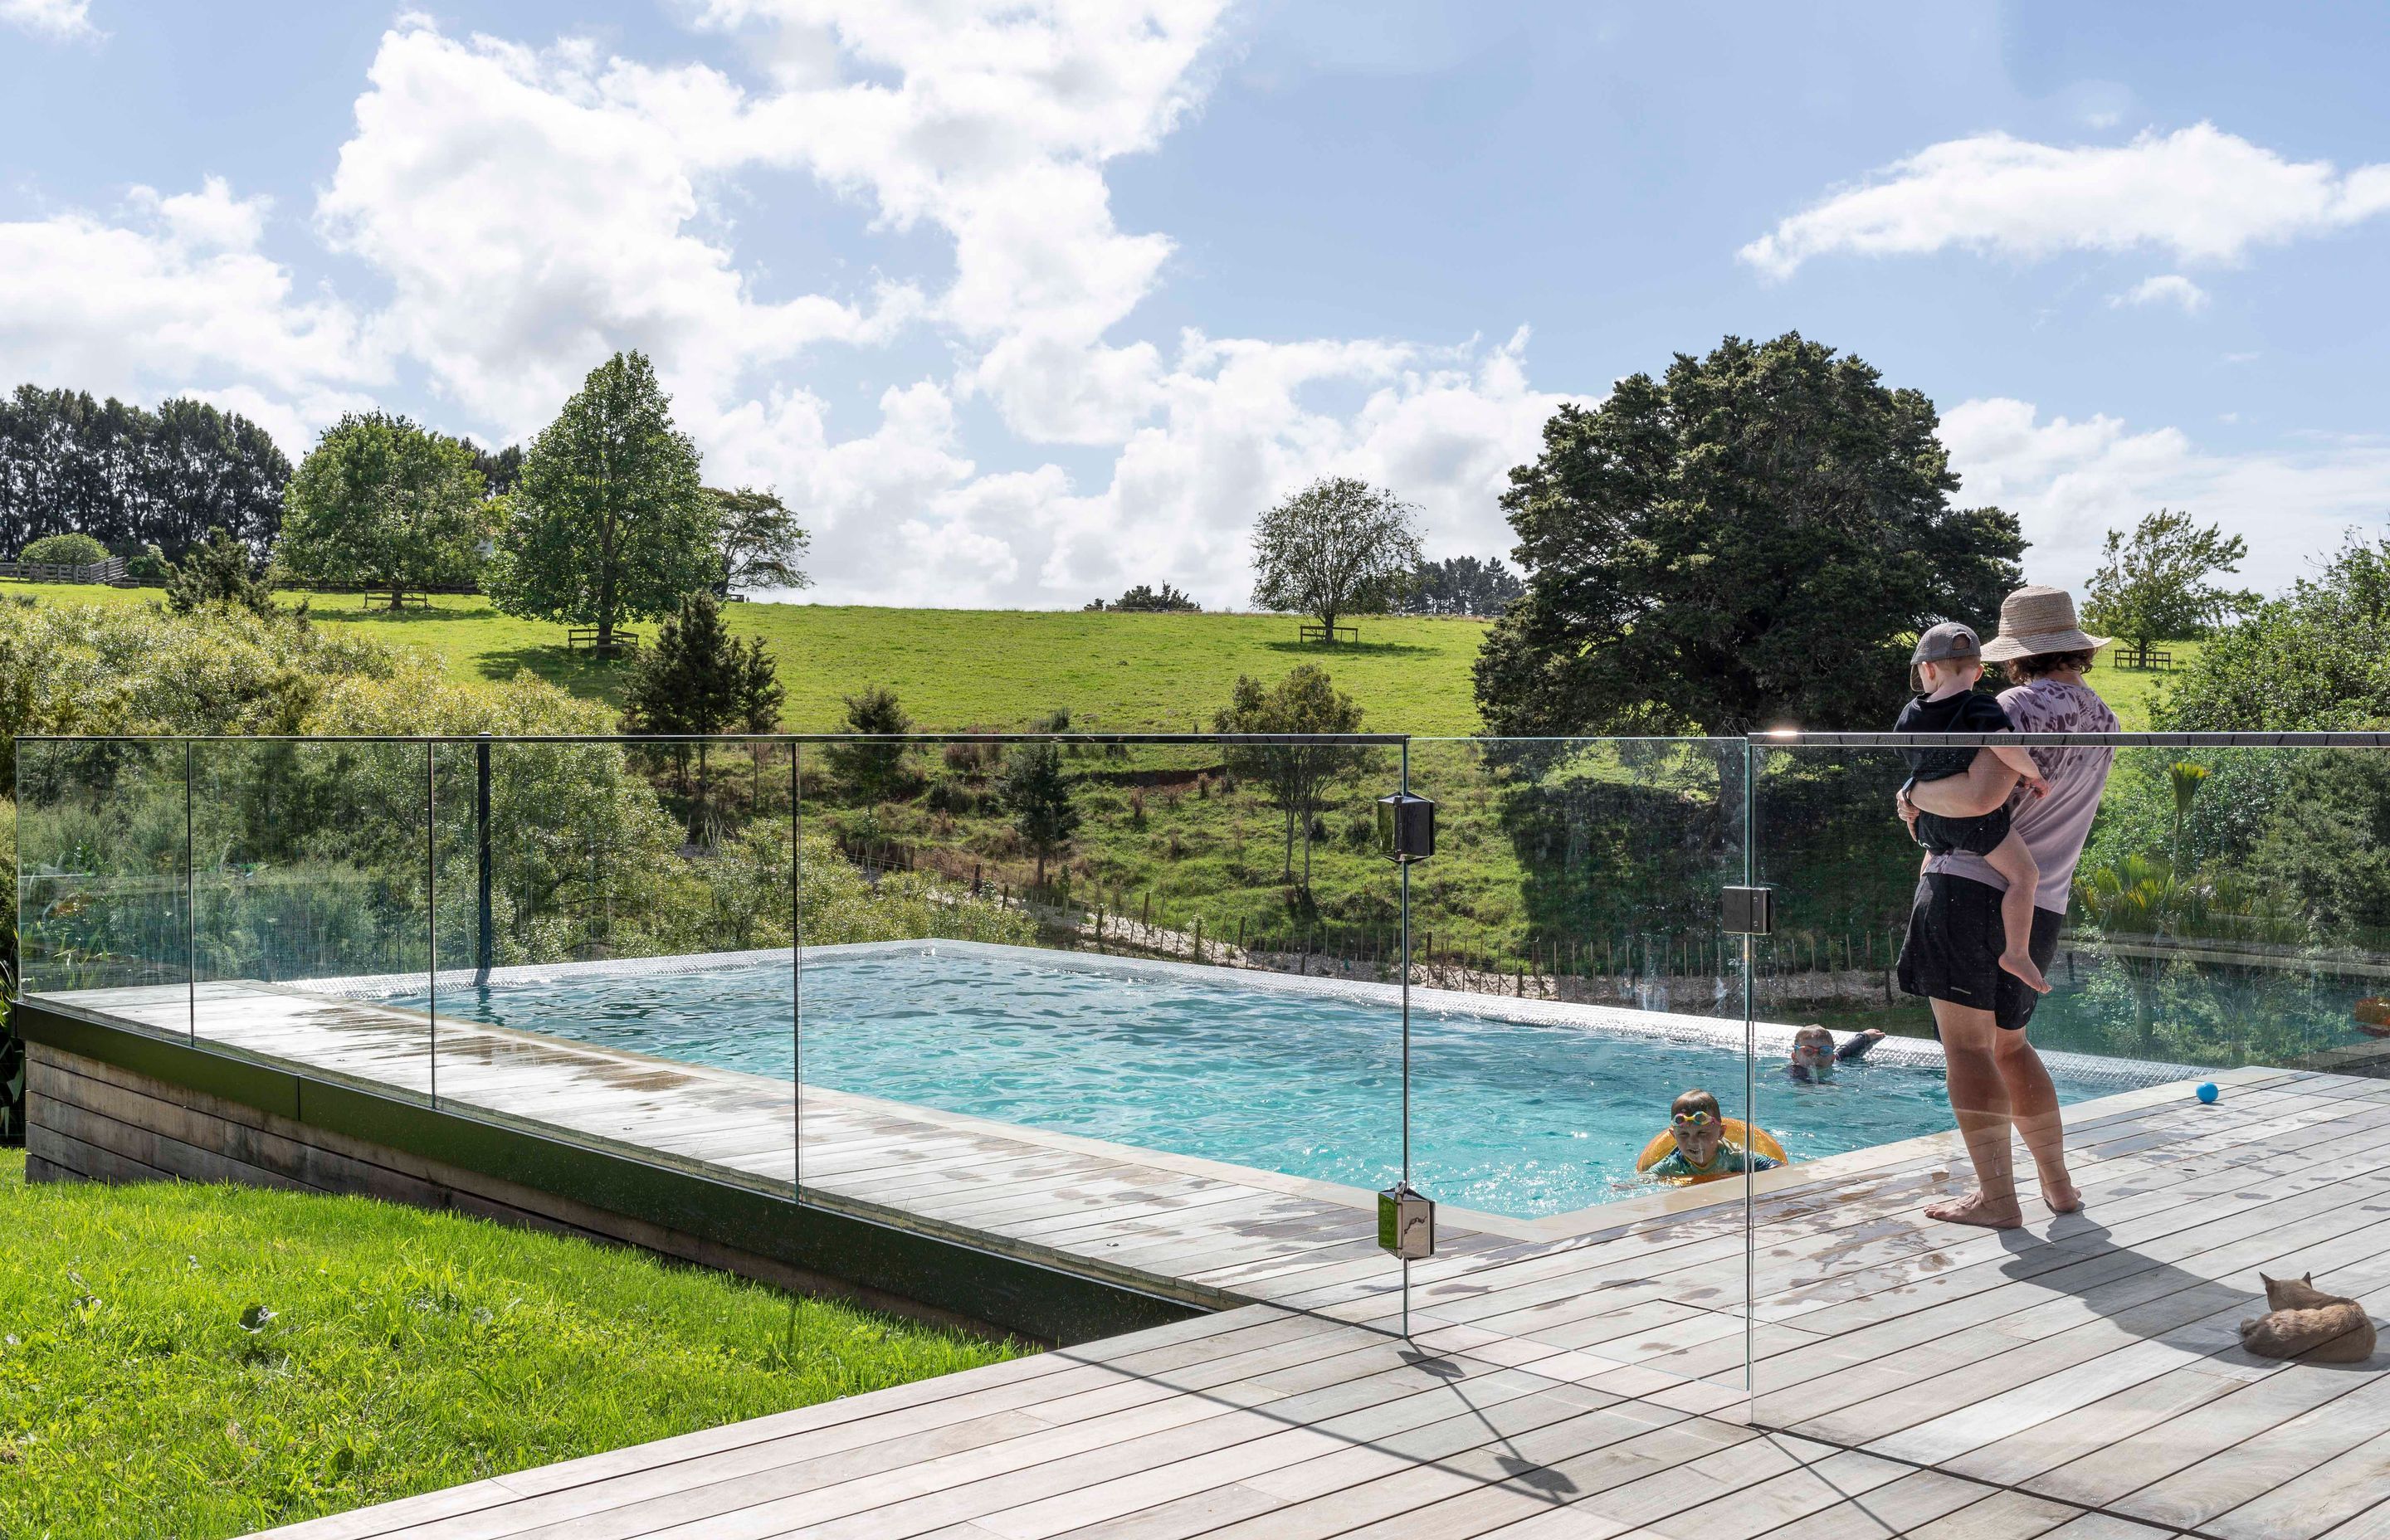 The family enjoys the stunning rural views across the land from the pool.